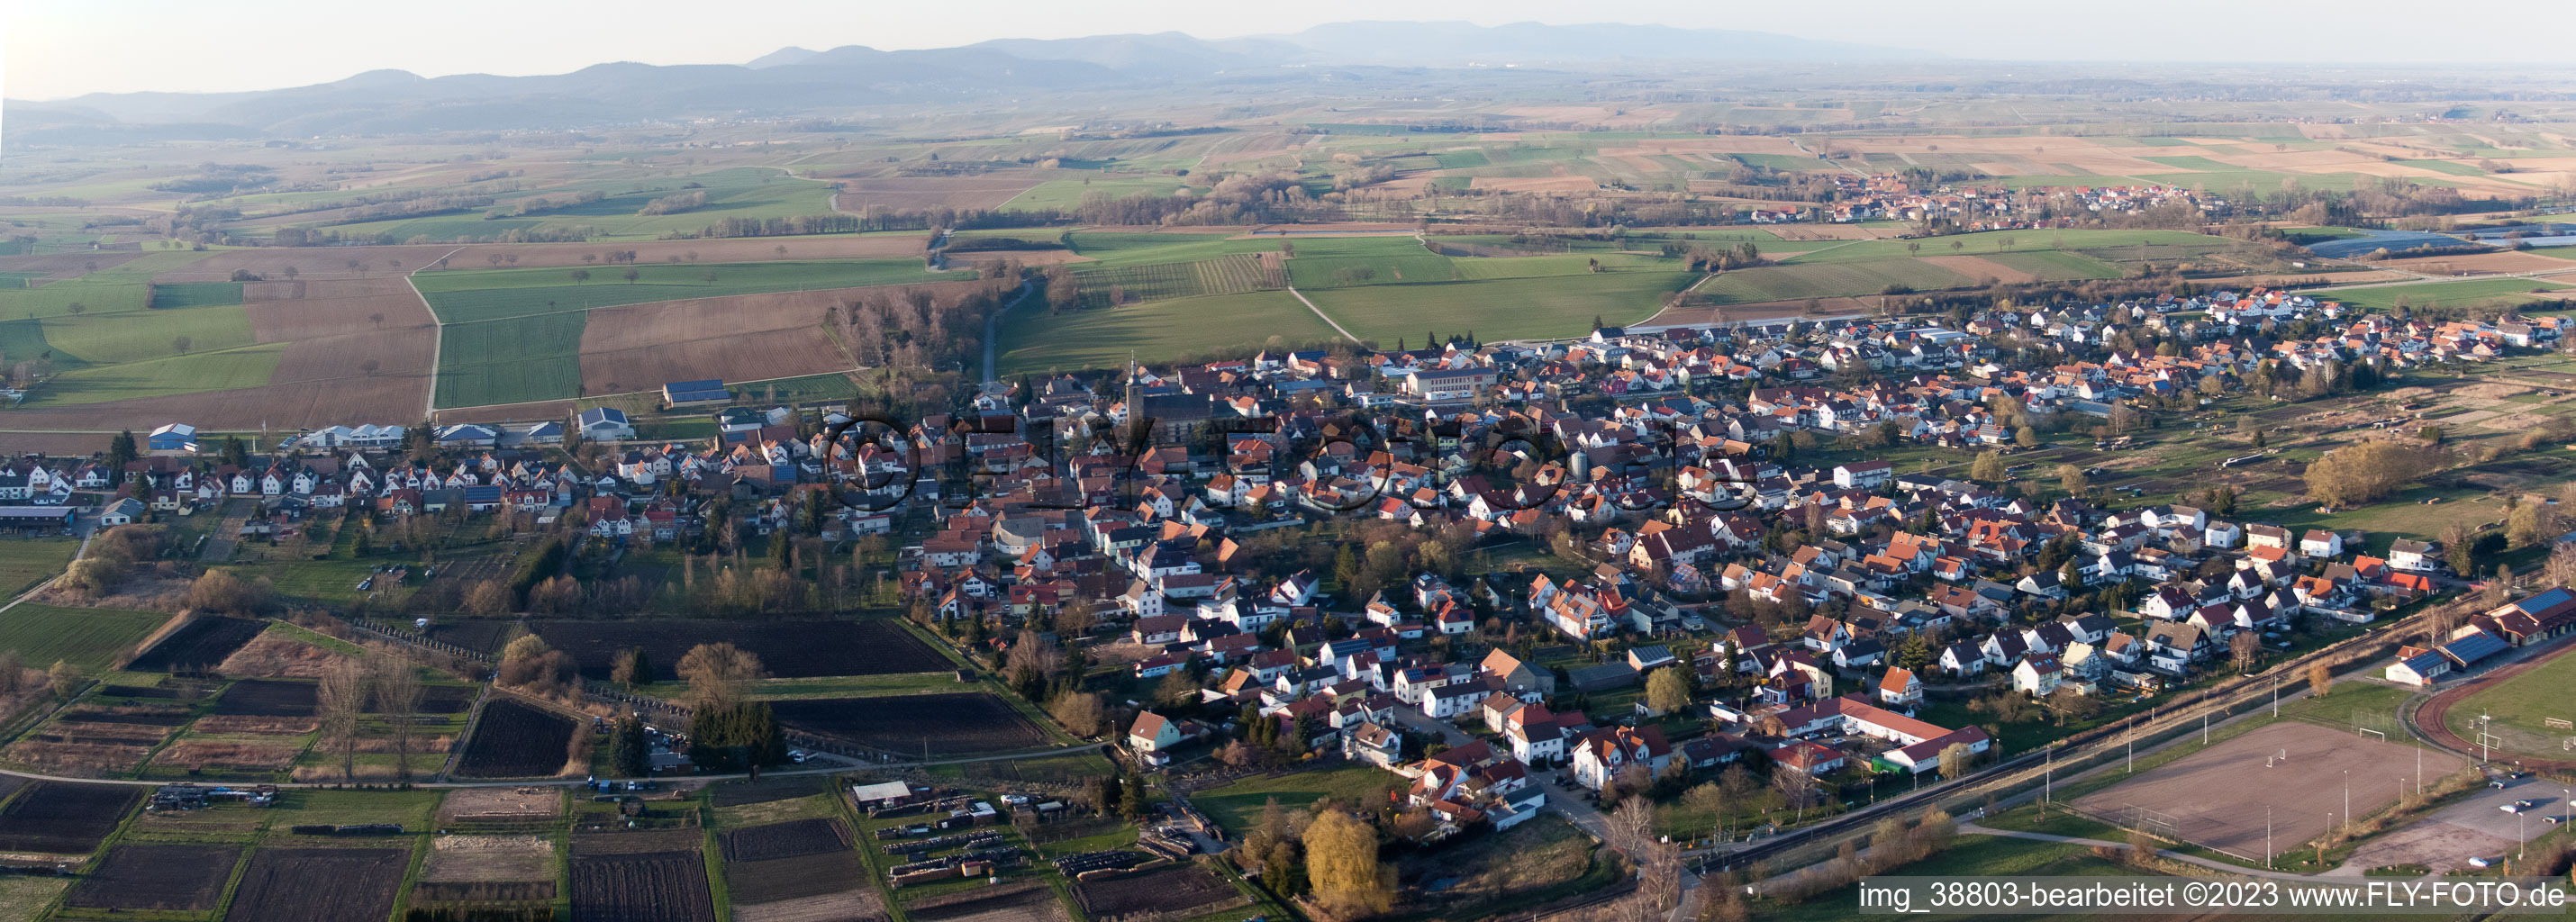 Steinfeld in the state Rhineland-Palatinate, Germany seen from above